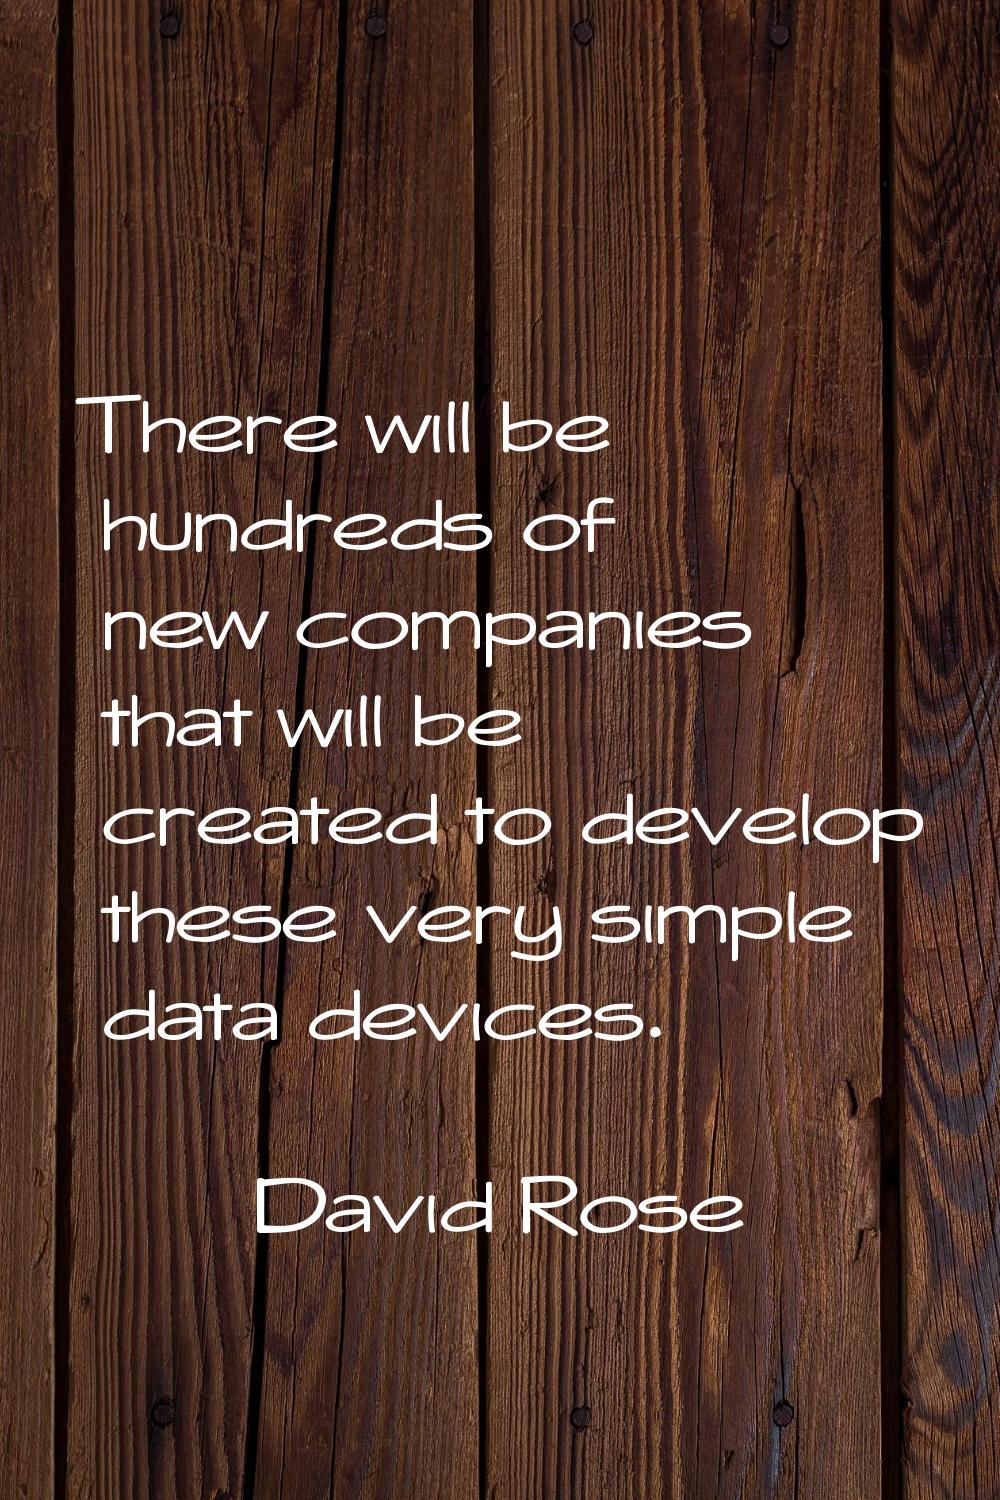 There will be hundreds of new companies that will be created to develop these very simple data devi